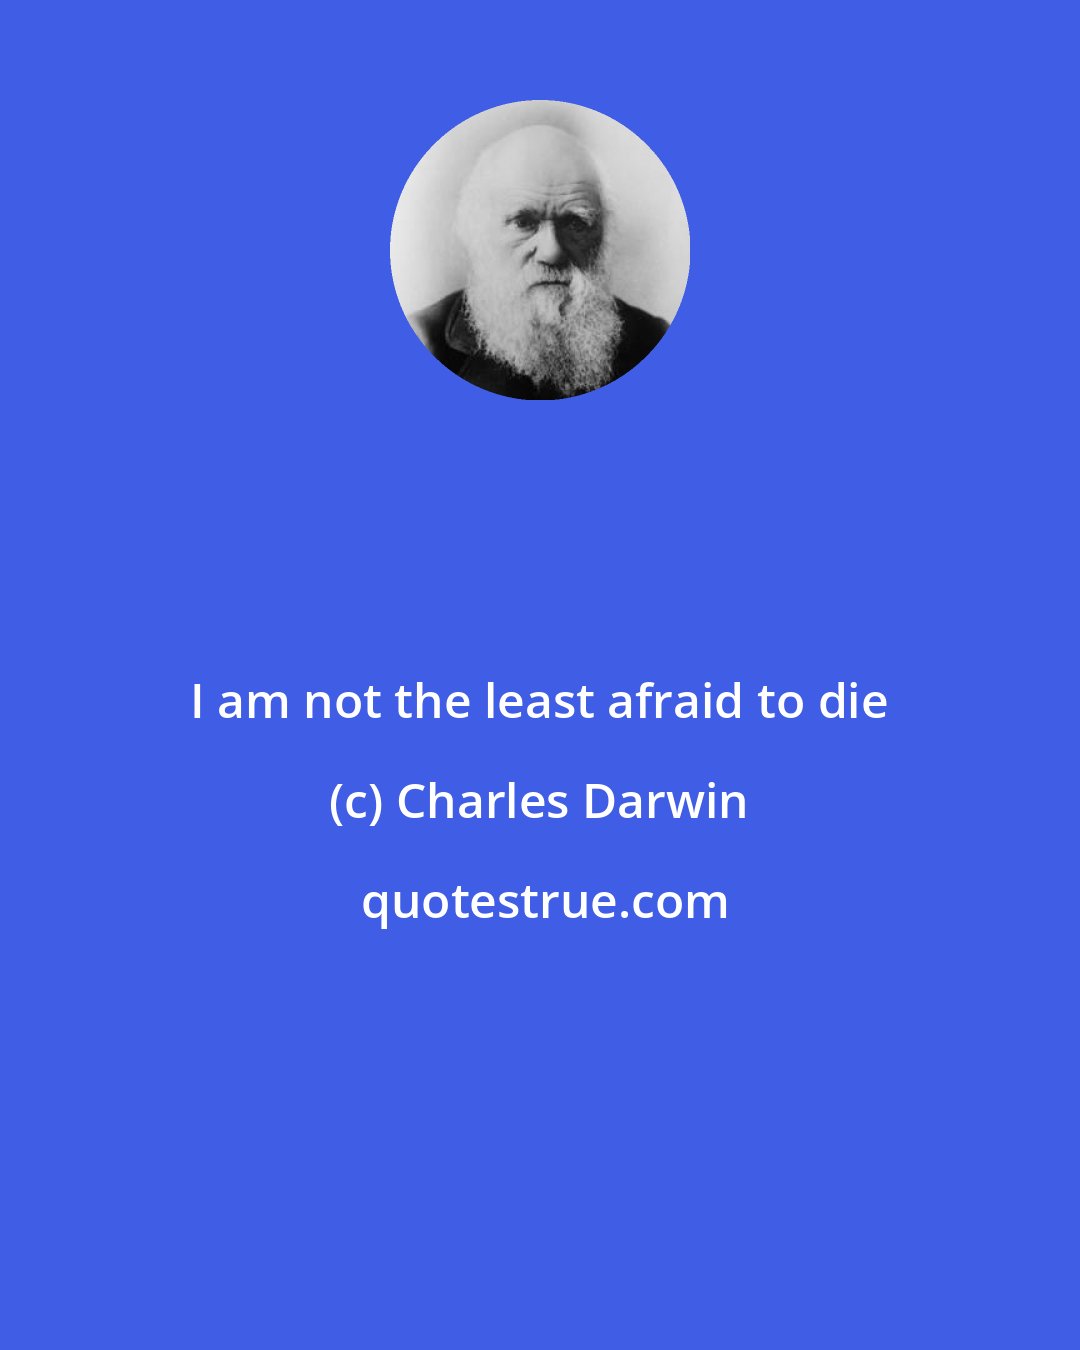 Charles Darwin: I am not the least afraid to die